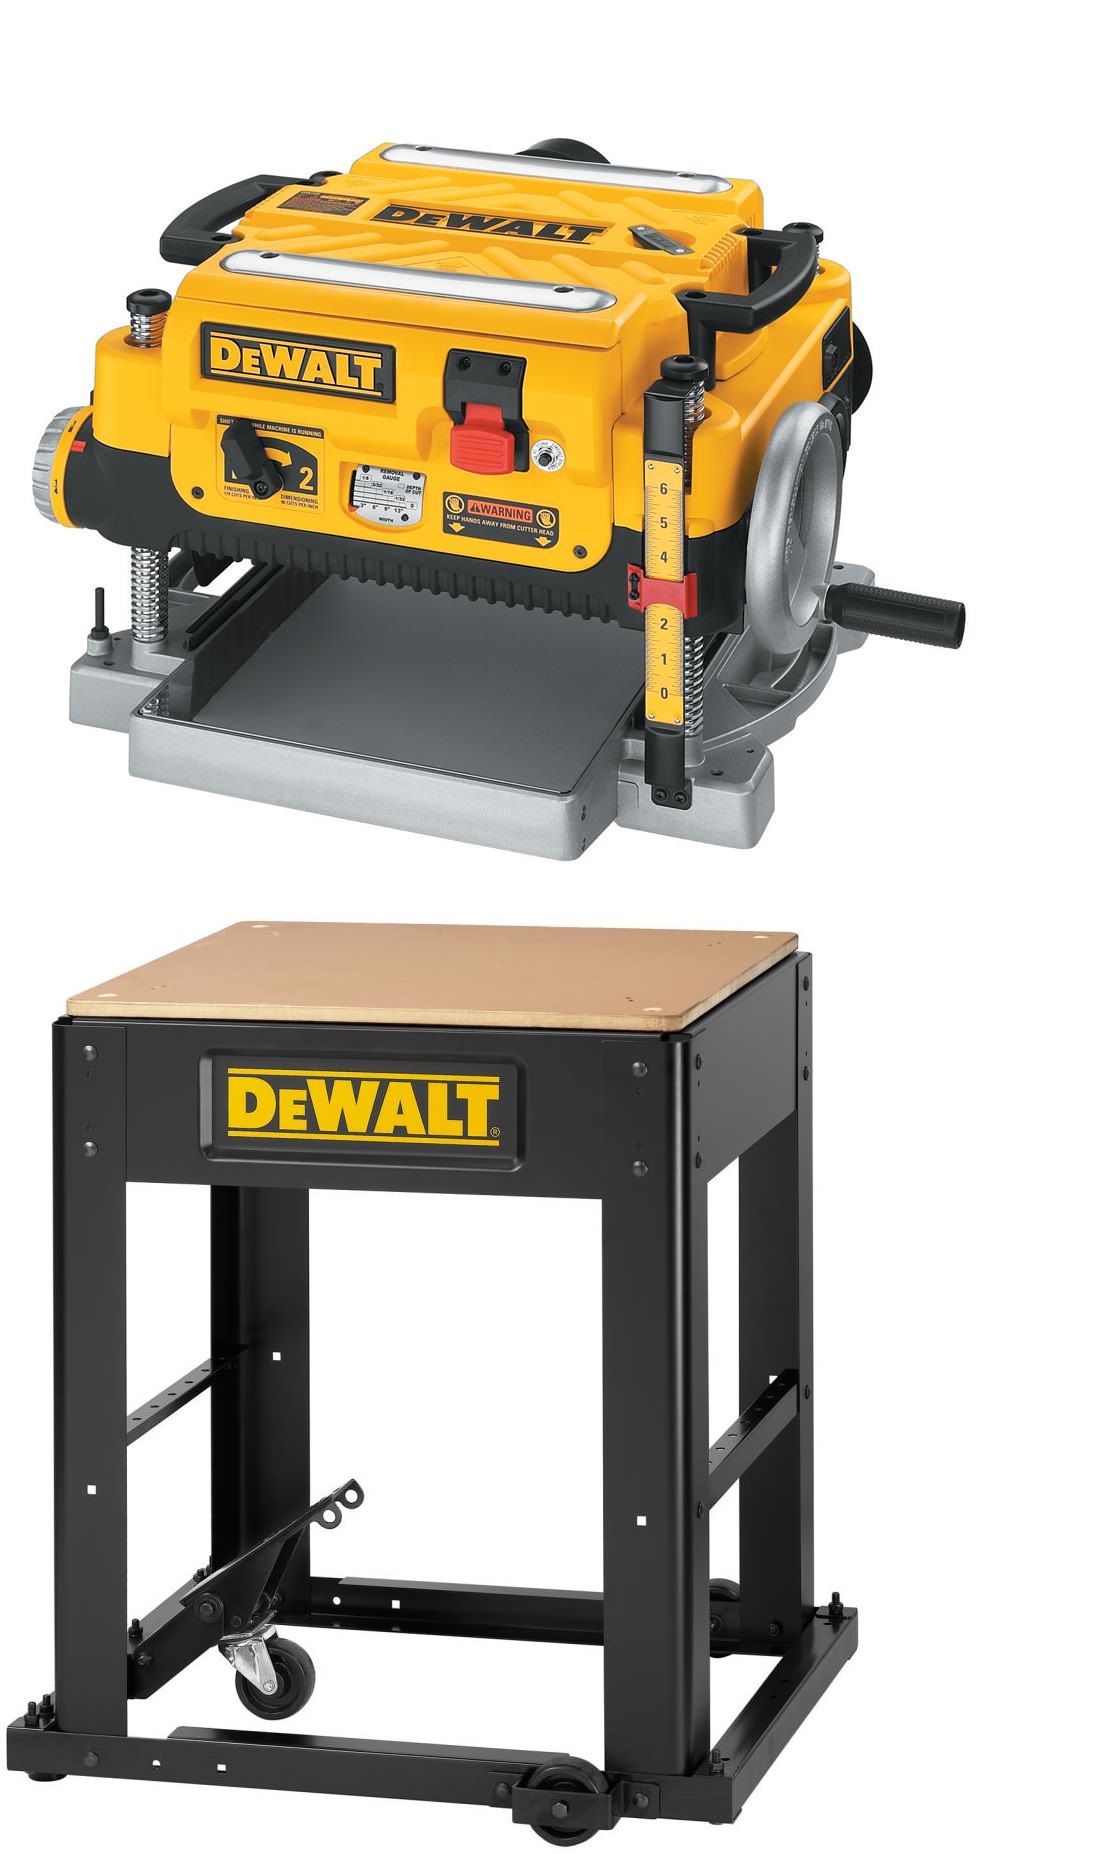 DEWALT Thickness Planer 13in Three Knife 2 Speed with Mobile Stand Bundle -  DW735-DW7350